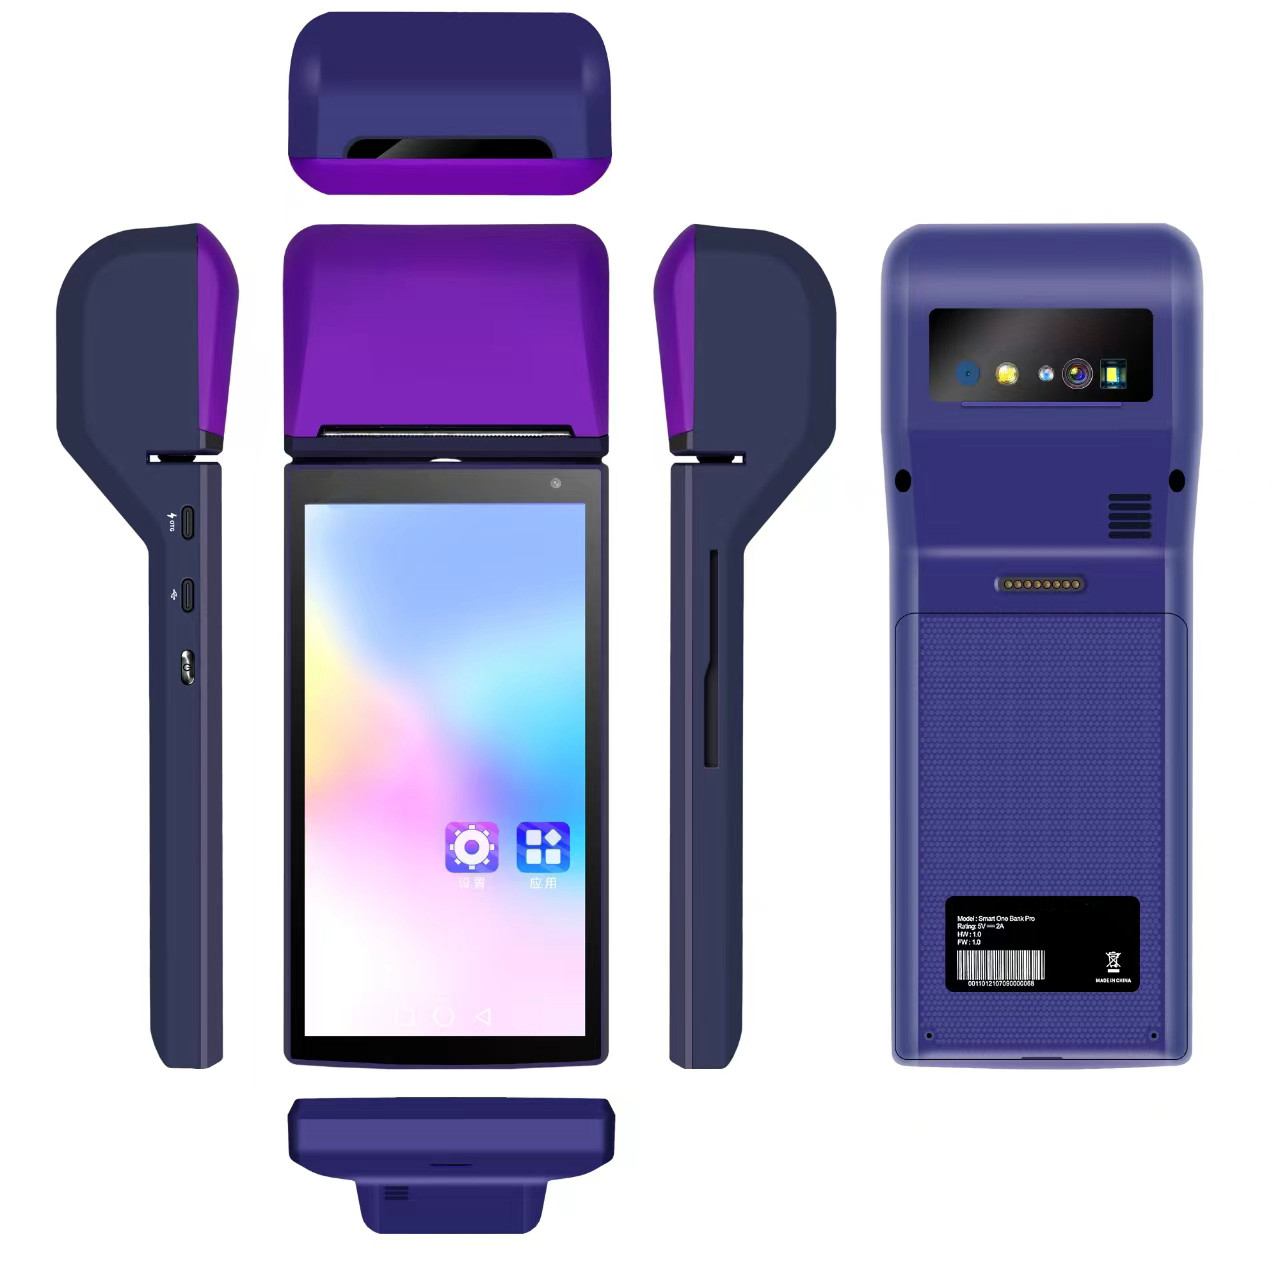 China Android Handheld POS Terminal With Wi-Fi Connectivity And HD Touchscreen Display factory